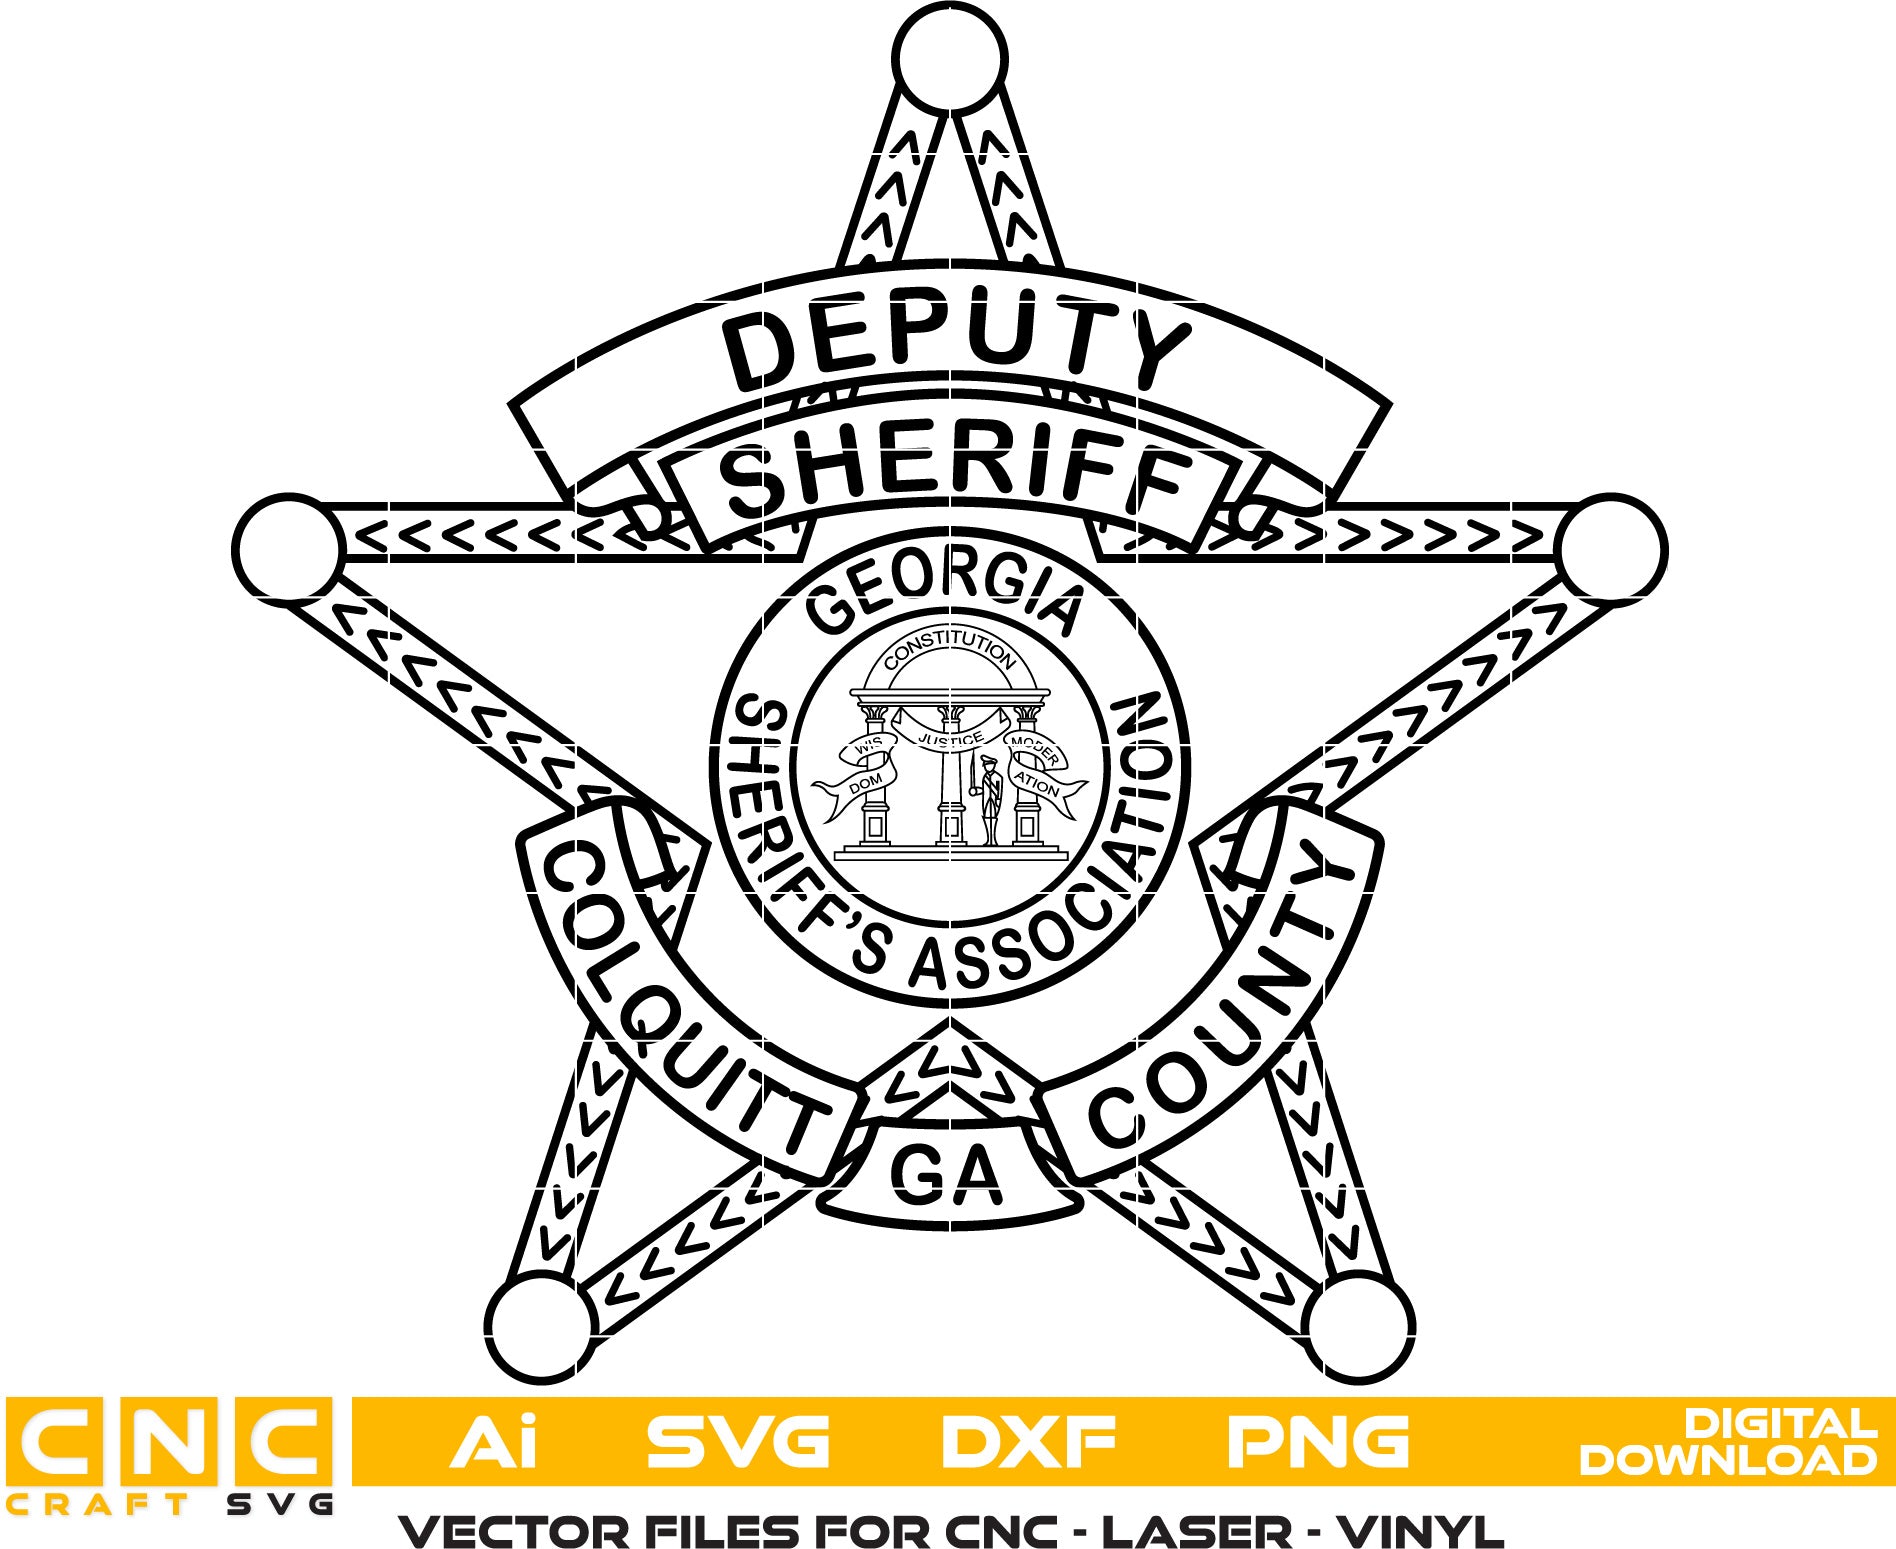 Deputy Sheriff Badge Colquitt County, Georgia Vector Art For Laser engraving, woodworking, acrylic painting, glass etching, and all types of printing machines.